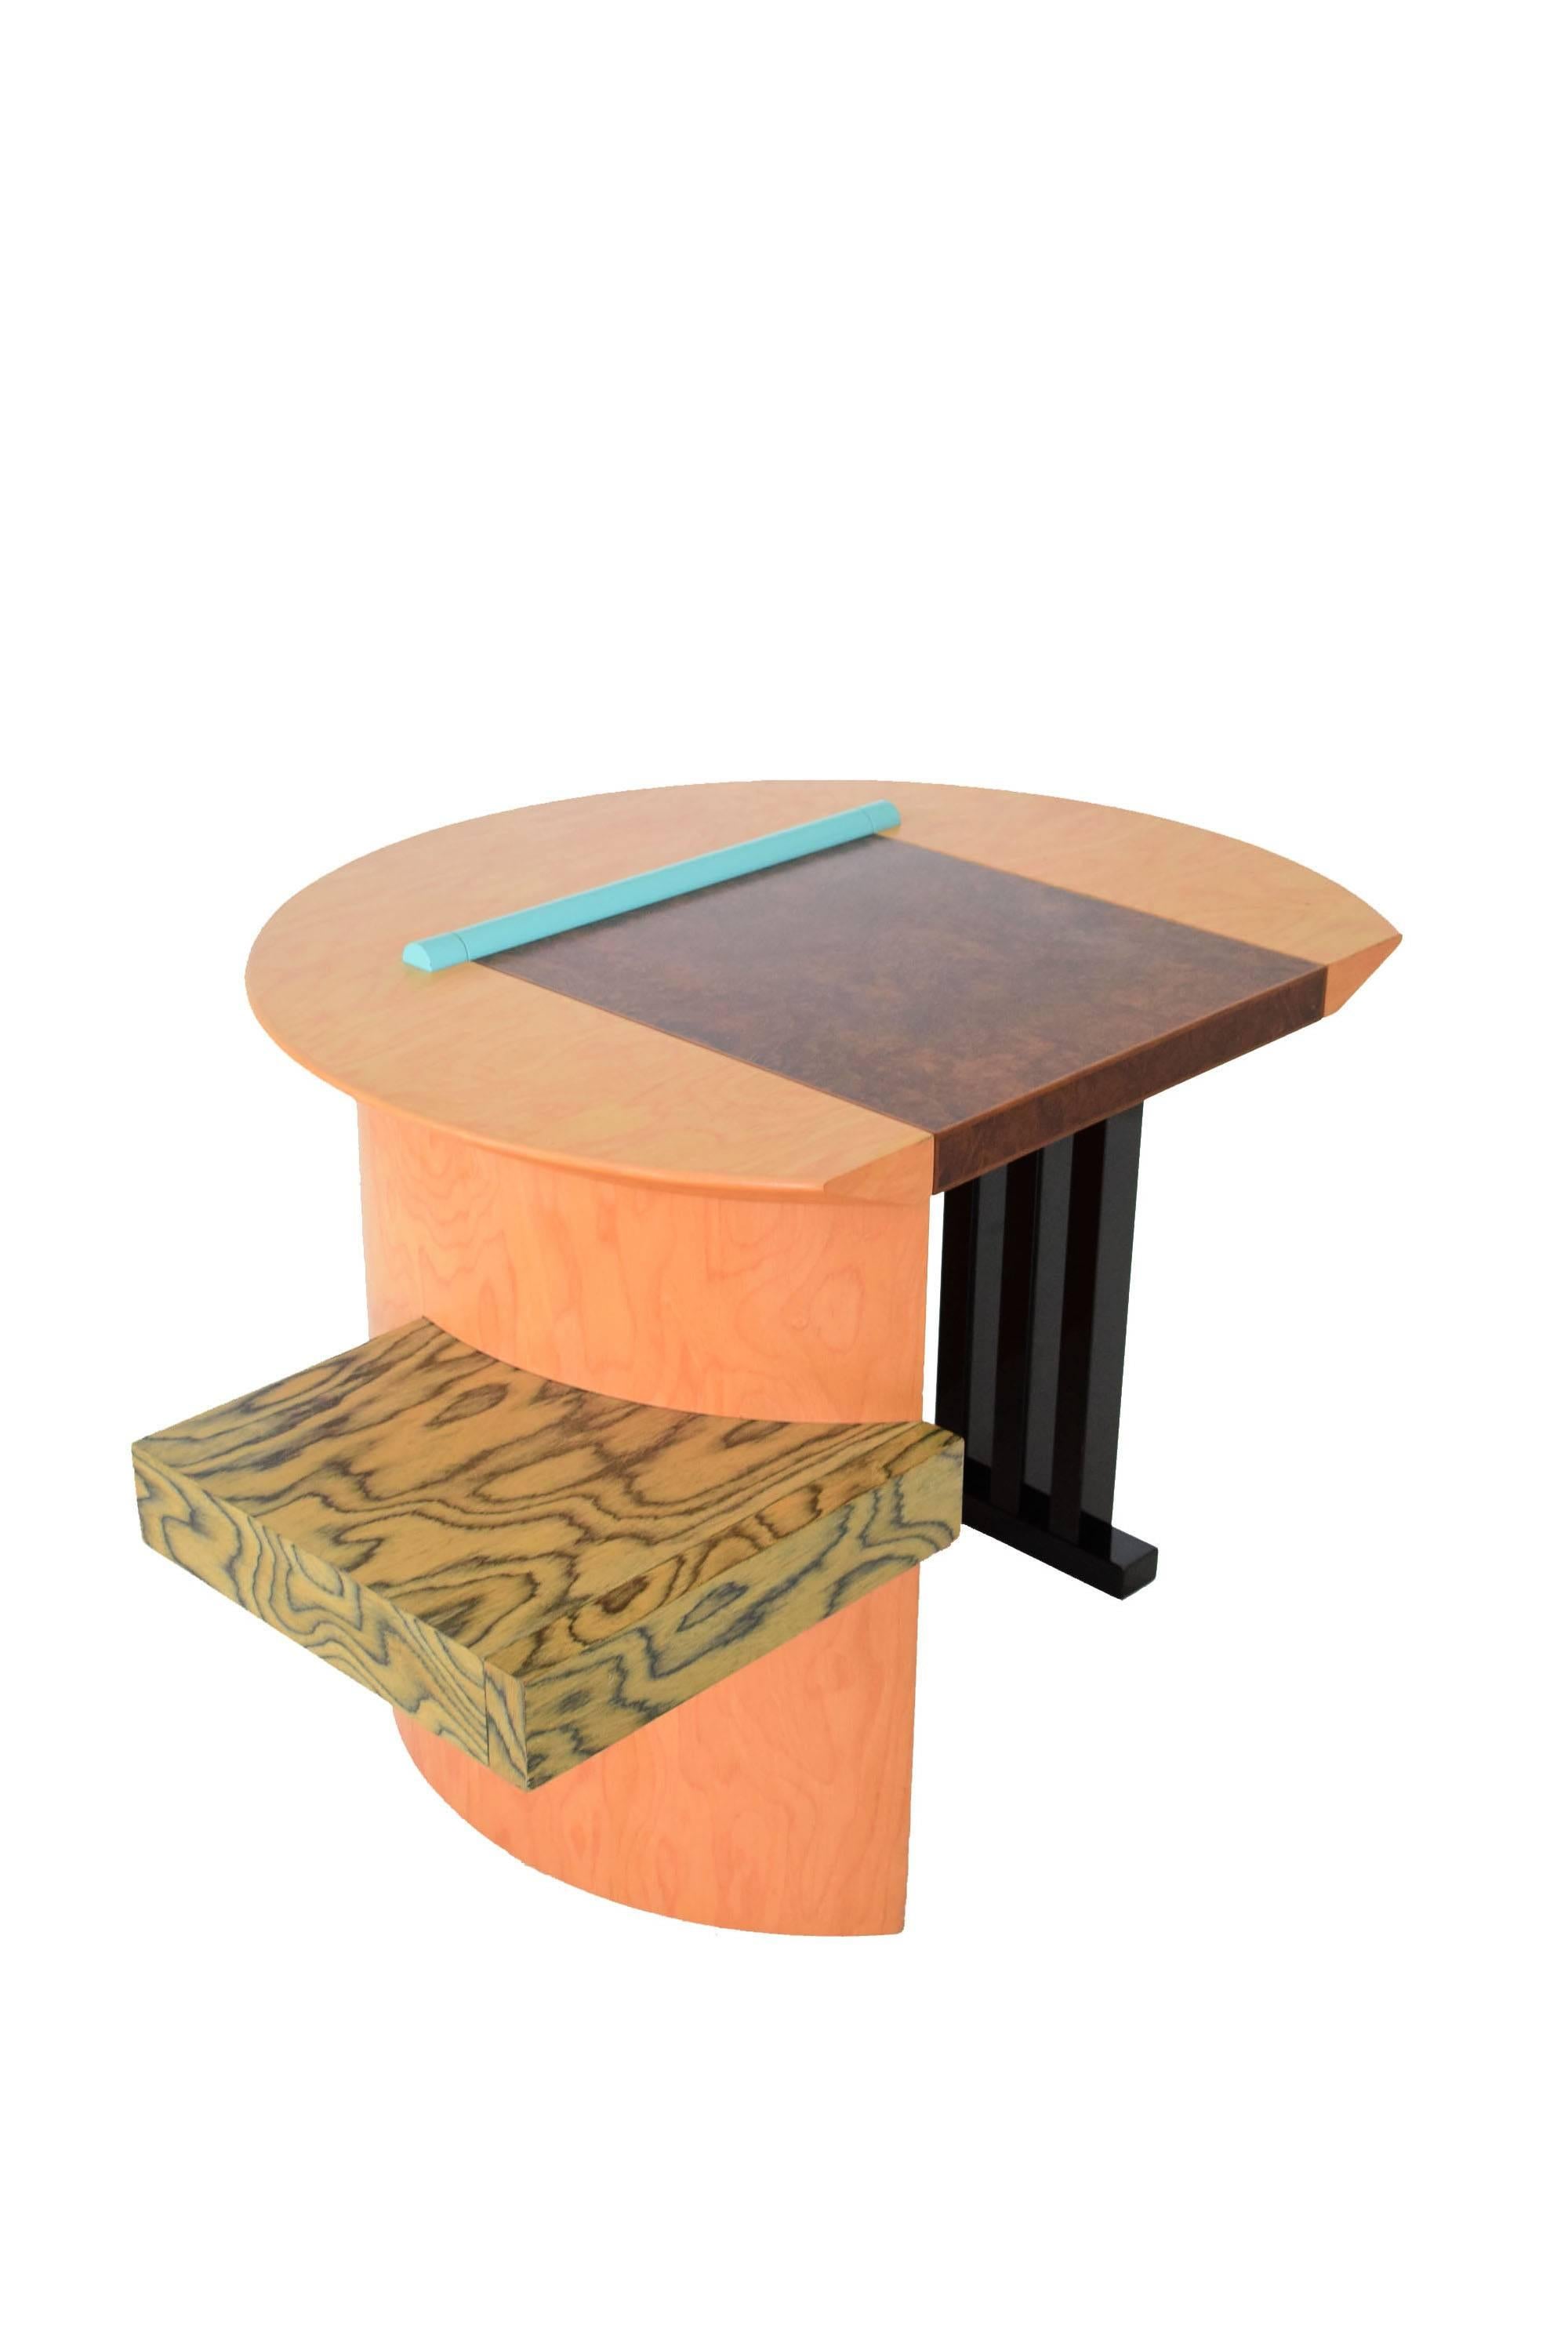 Sophia, a postmodern writing desk of reconstituted veneer, briar and lacquered wood designed by Aldo Cibic for Memphis Milano, circa 1985.

An original and rare 1980s piece of Memphis.

We can ship worldwide using our own carrier. Please contact